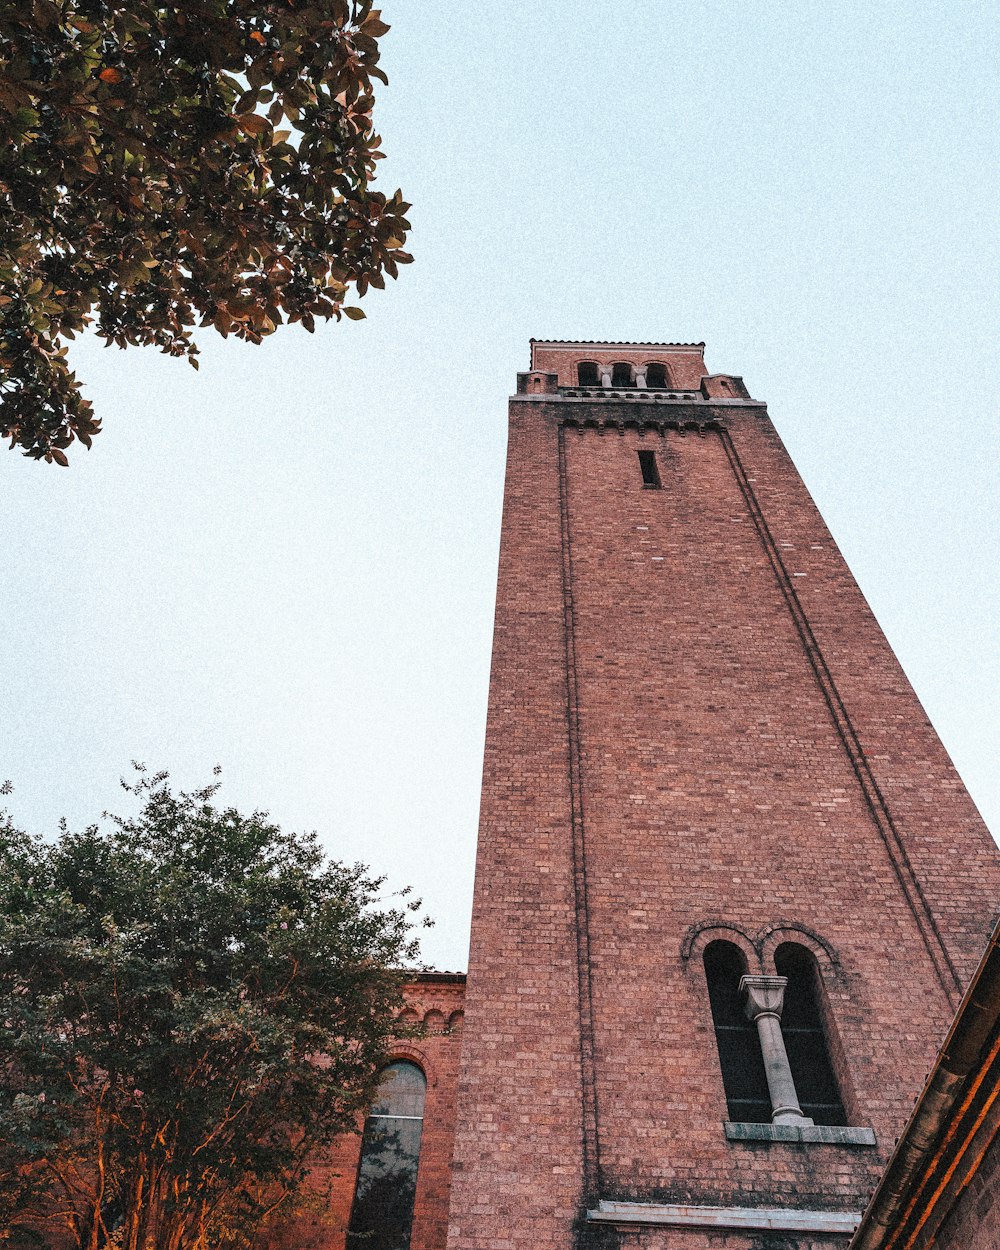 a tall brick tower with a clock on it's side